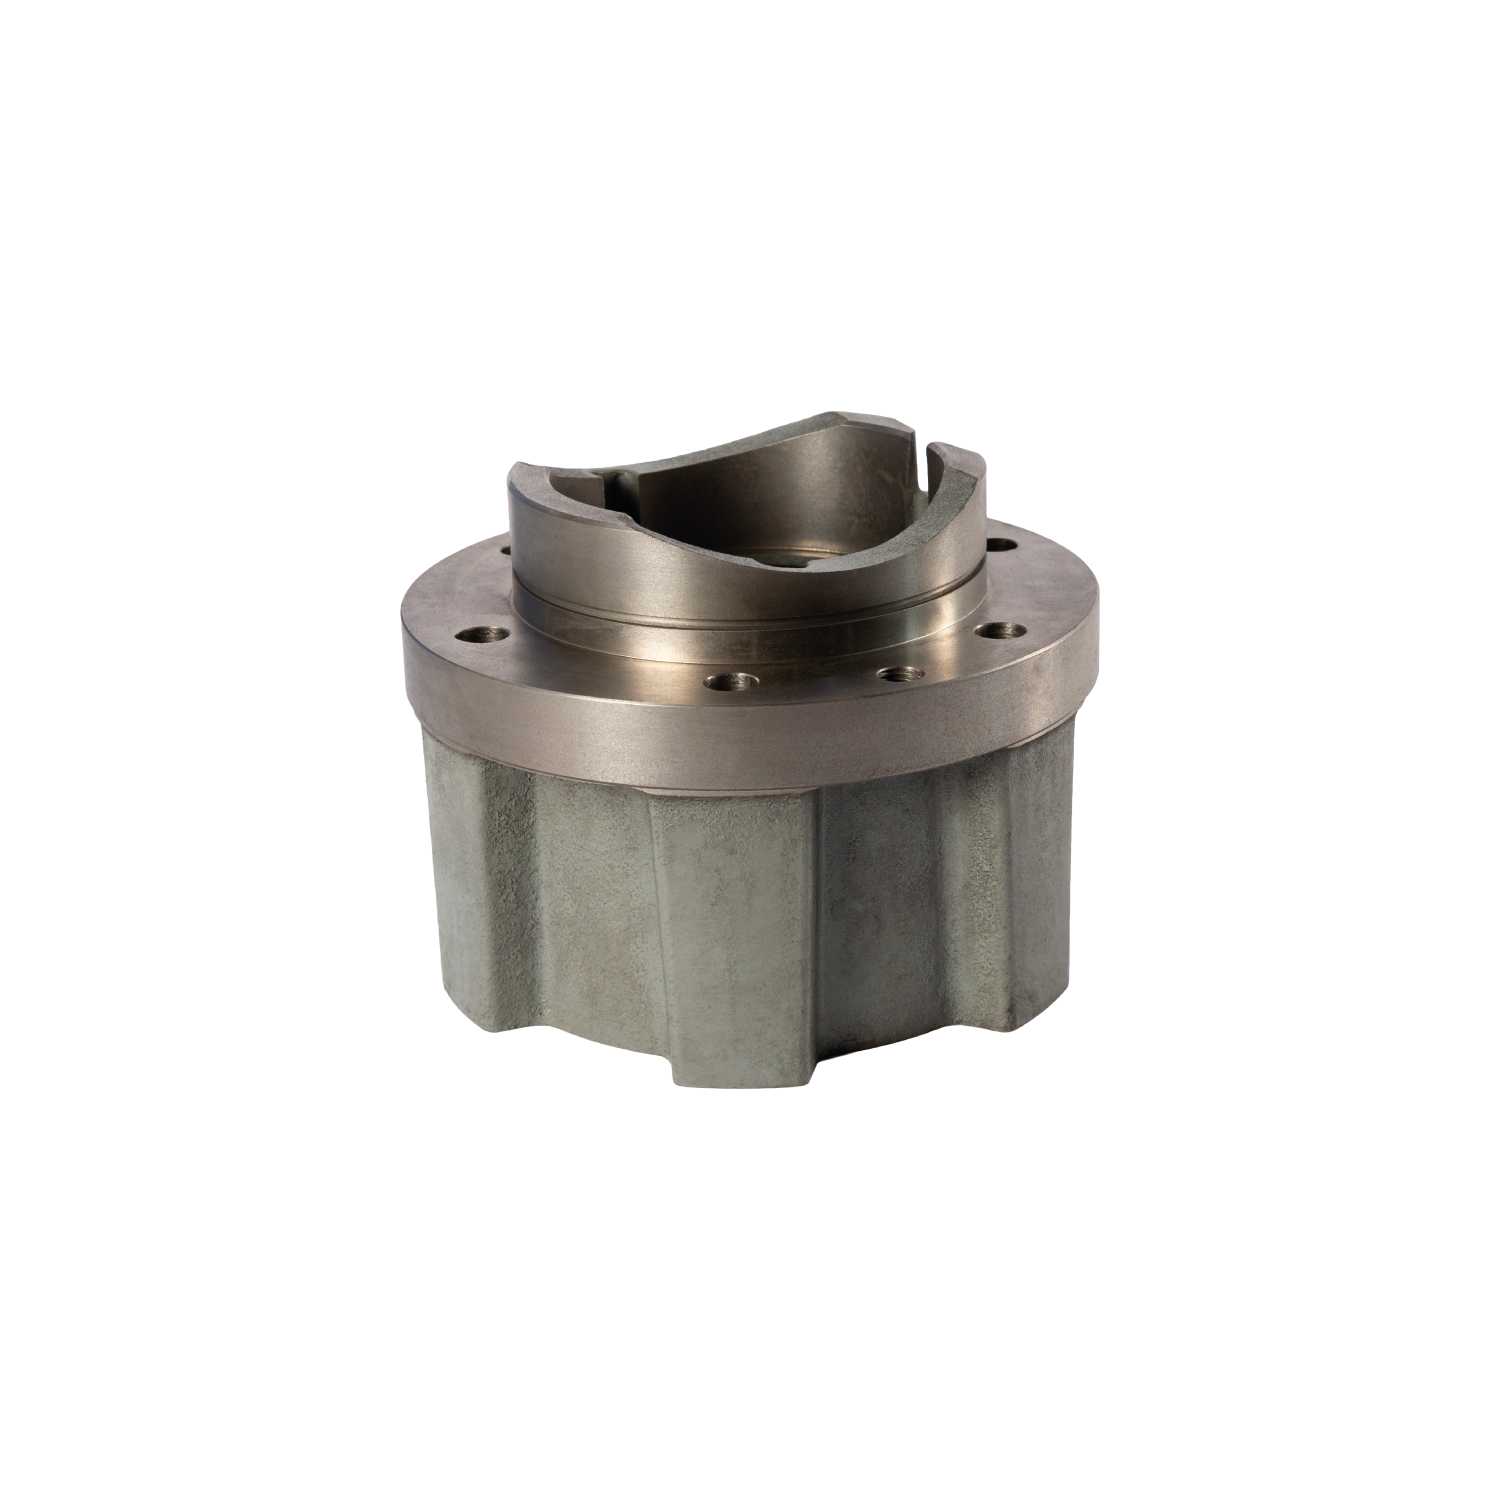 Output and motor flange_2